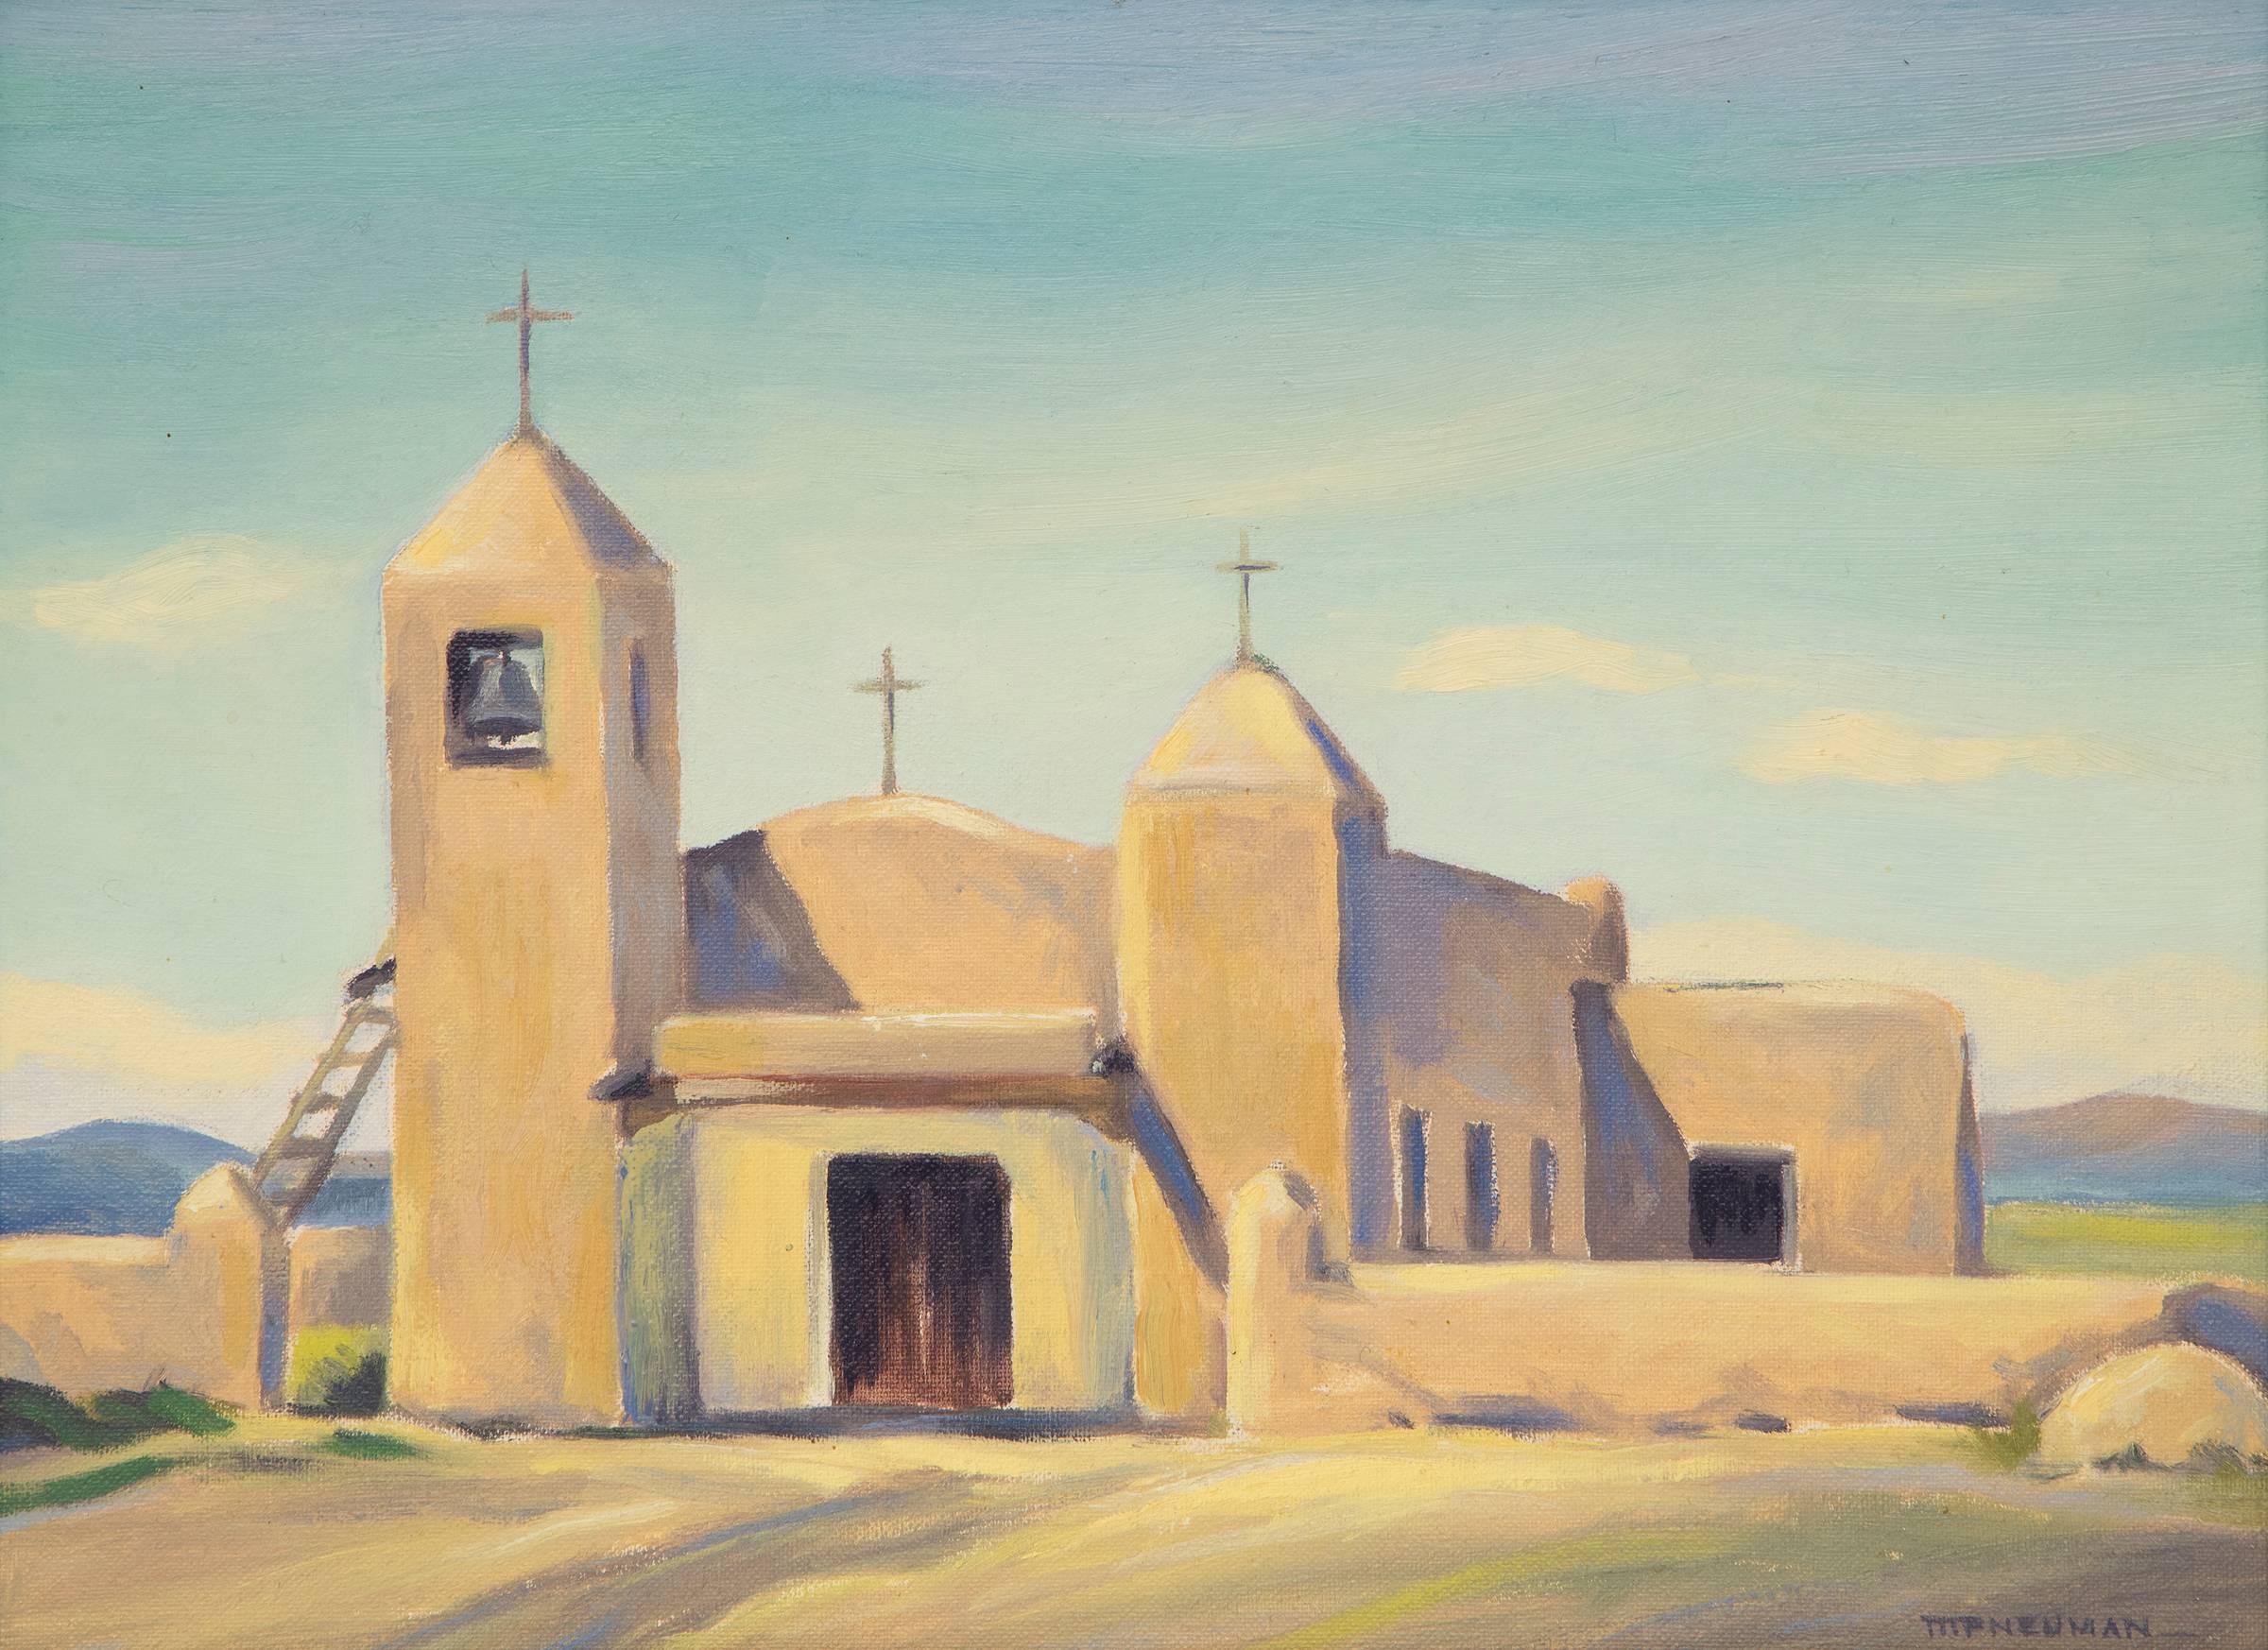 Small Church, Taos (New Mexico) - Painting by Mildred Pneuman